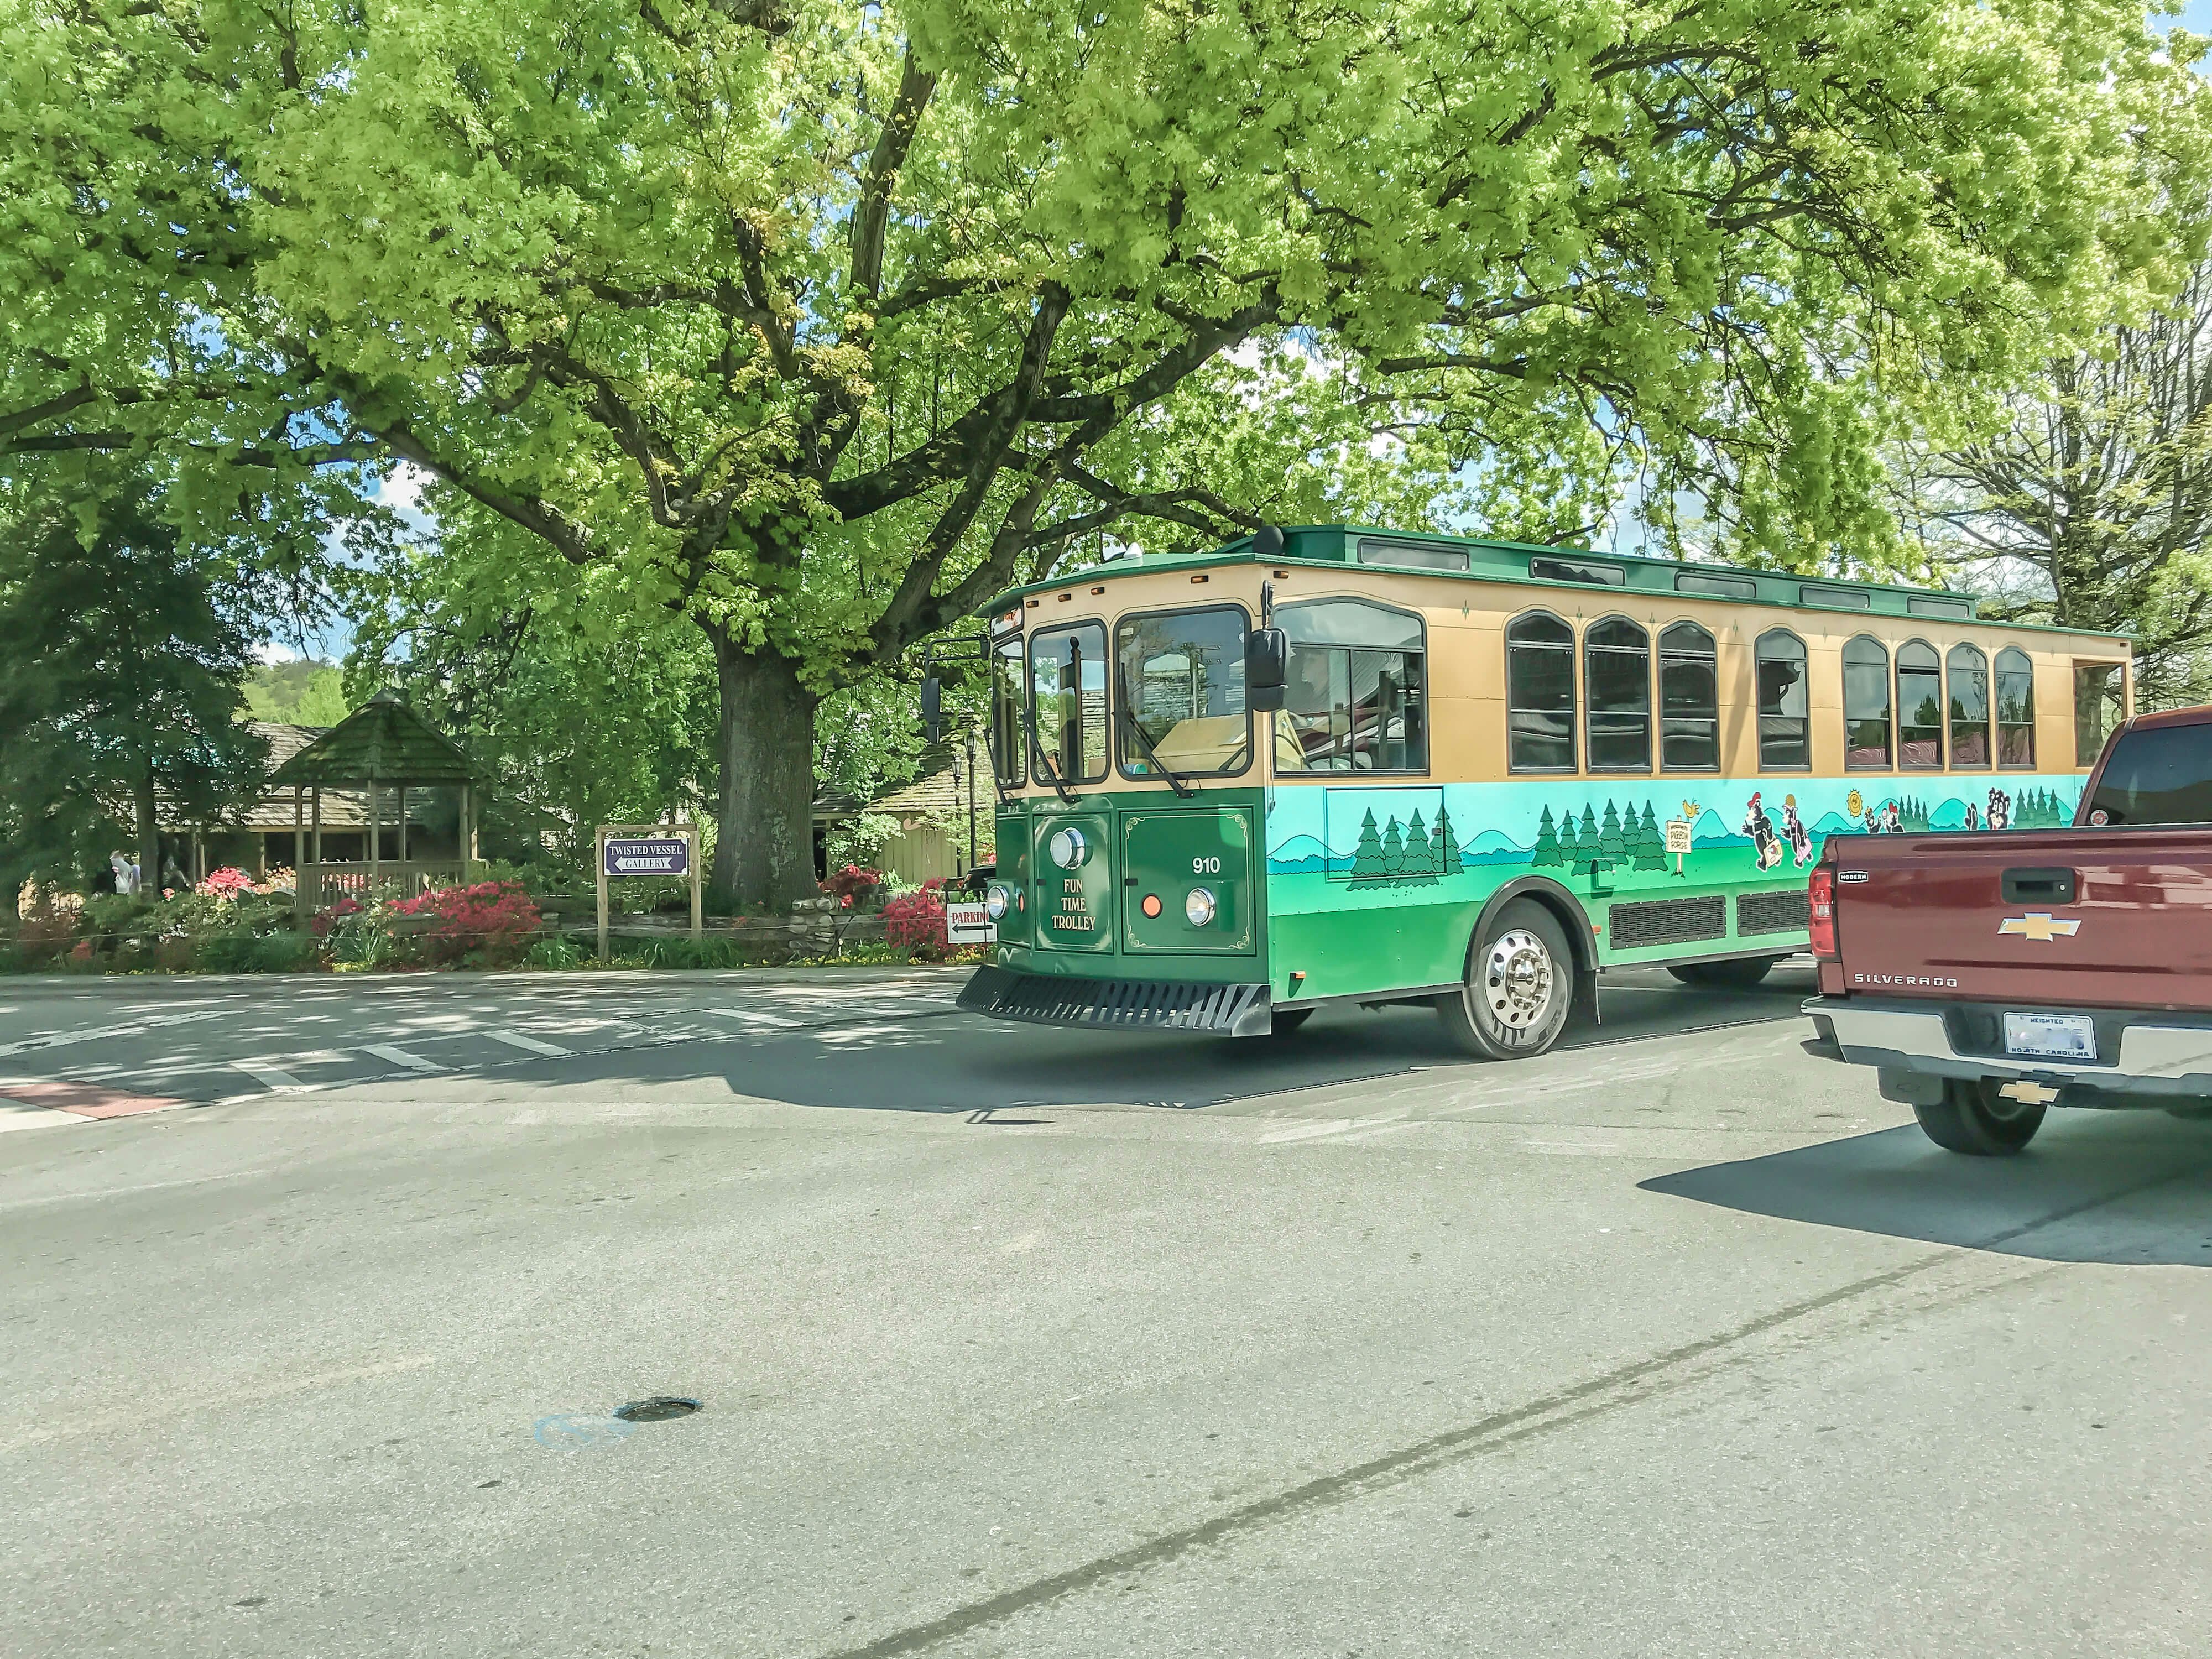 A trolley in Pigeon Forge, Tennessee